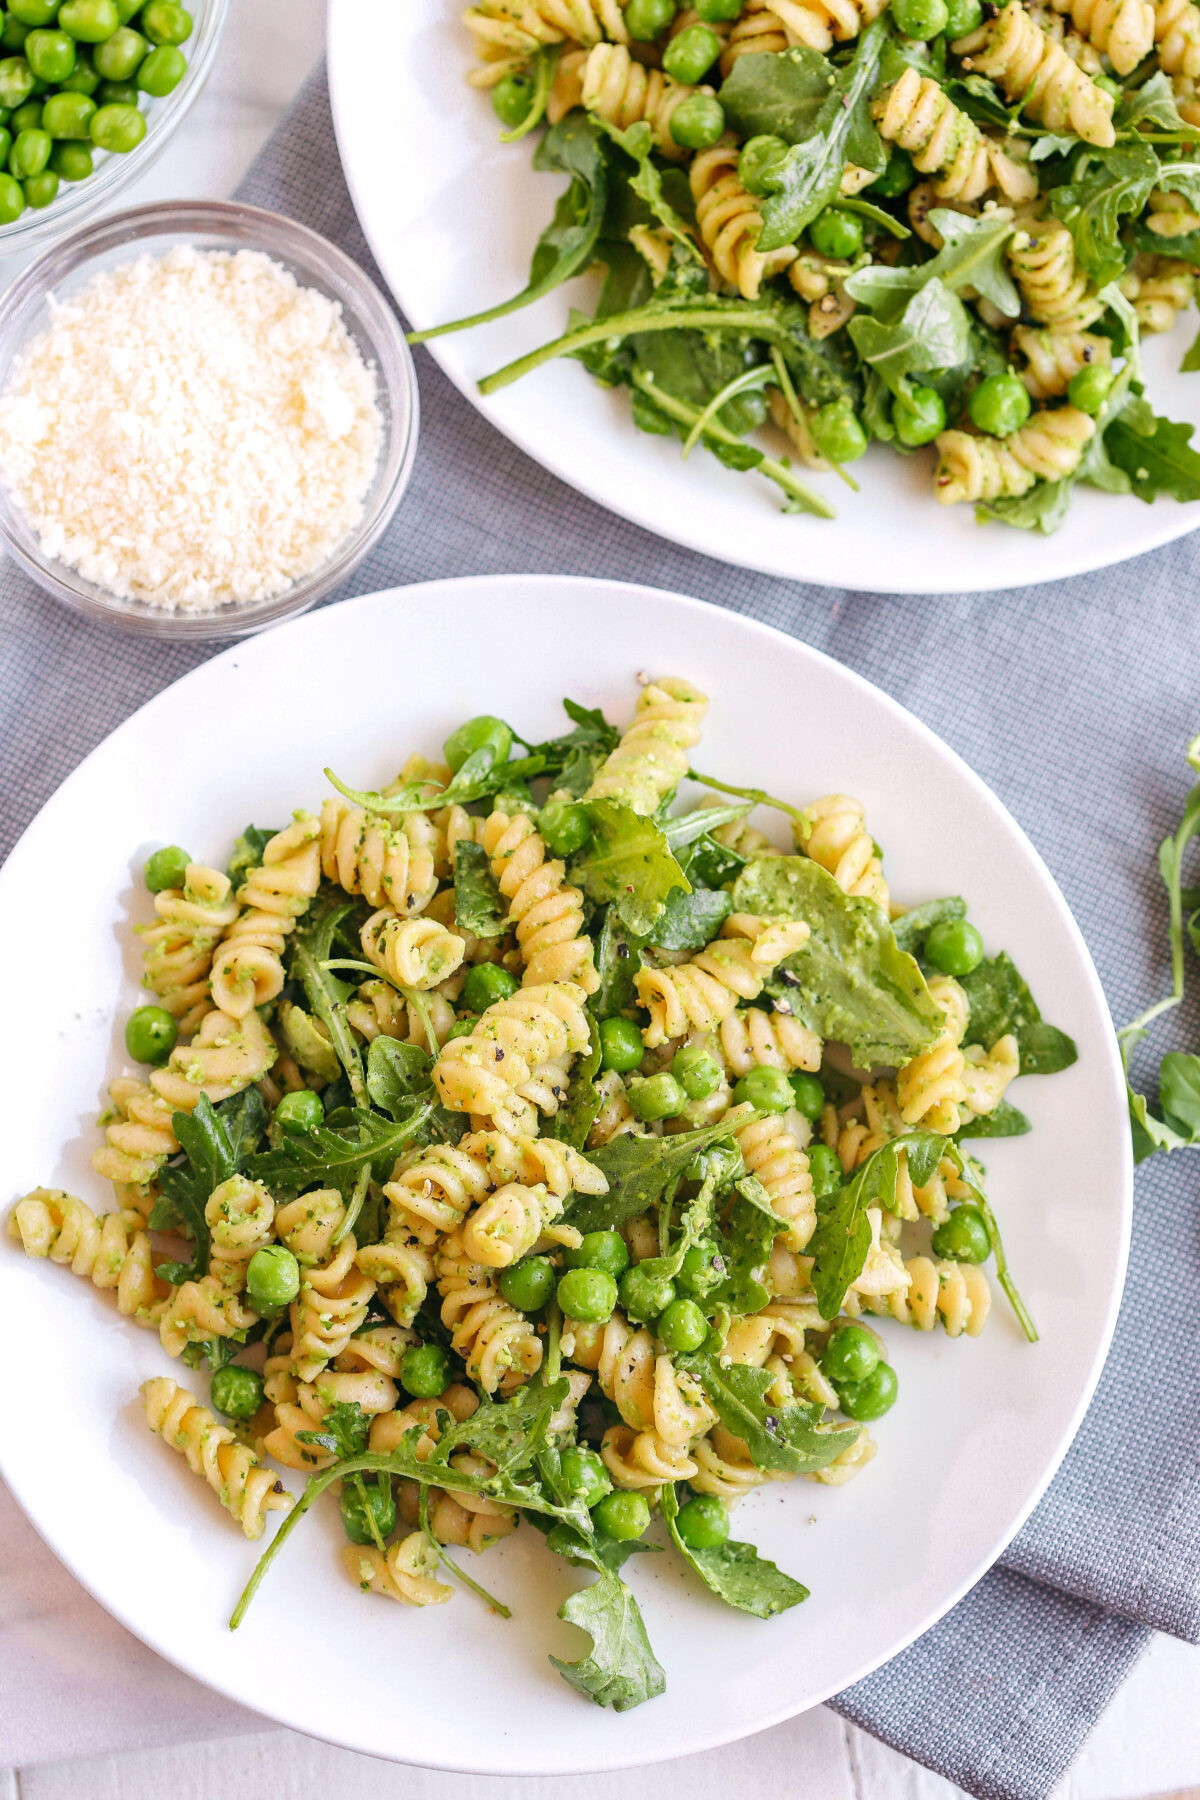 This light and fresh Pea and Arugula Pesto Pasta Salad is the perfect meal or side dish that is easy to make, healthy and delicious!